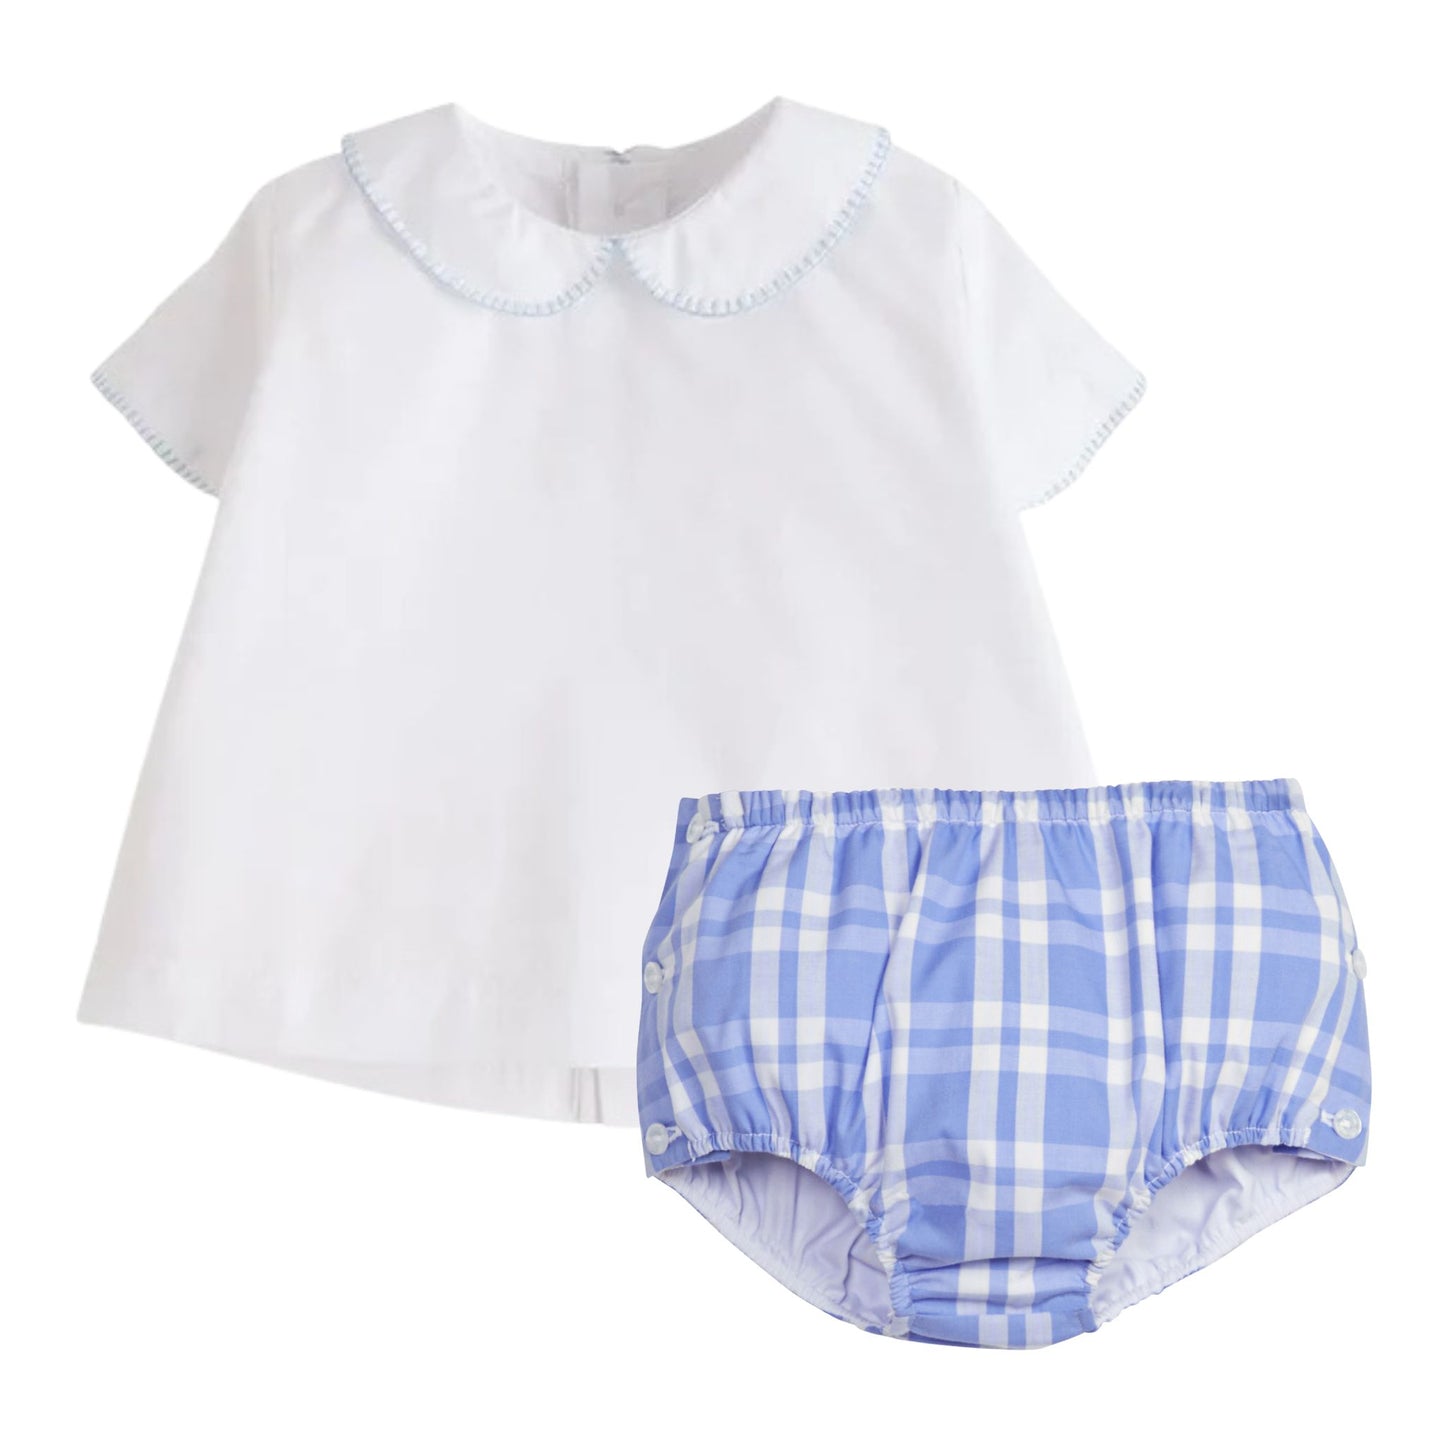 Whipstitch Day Shirt and Jam Panty Set